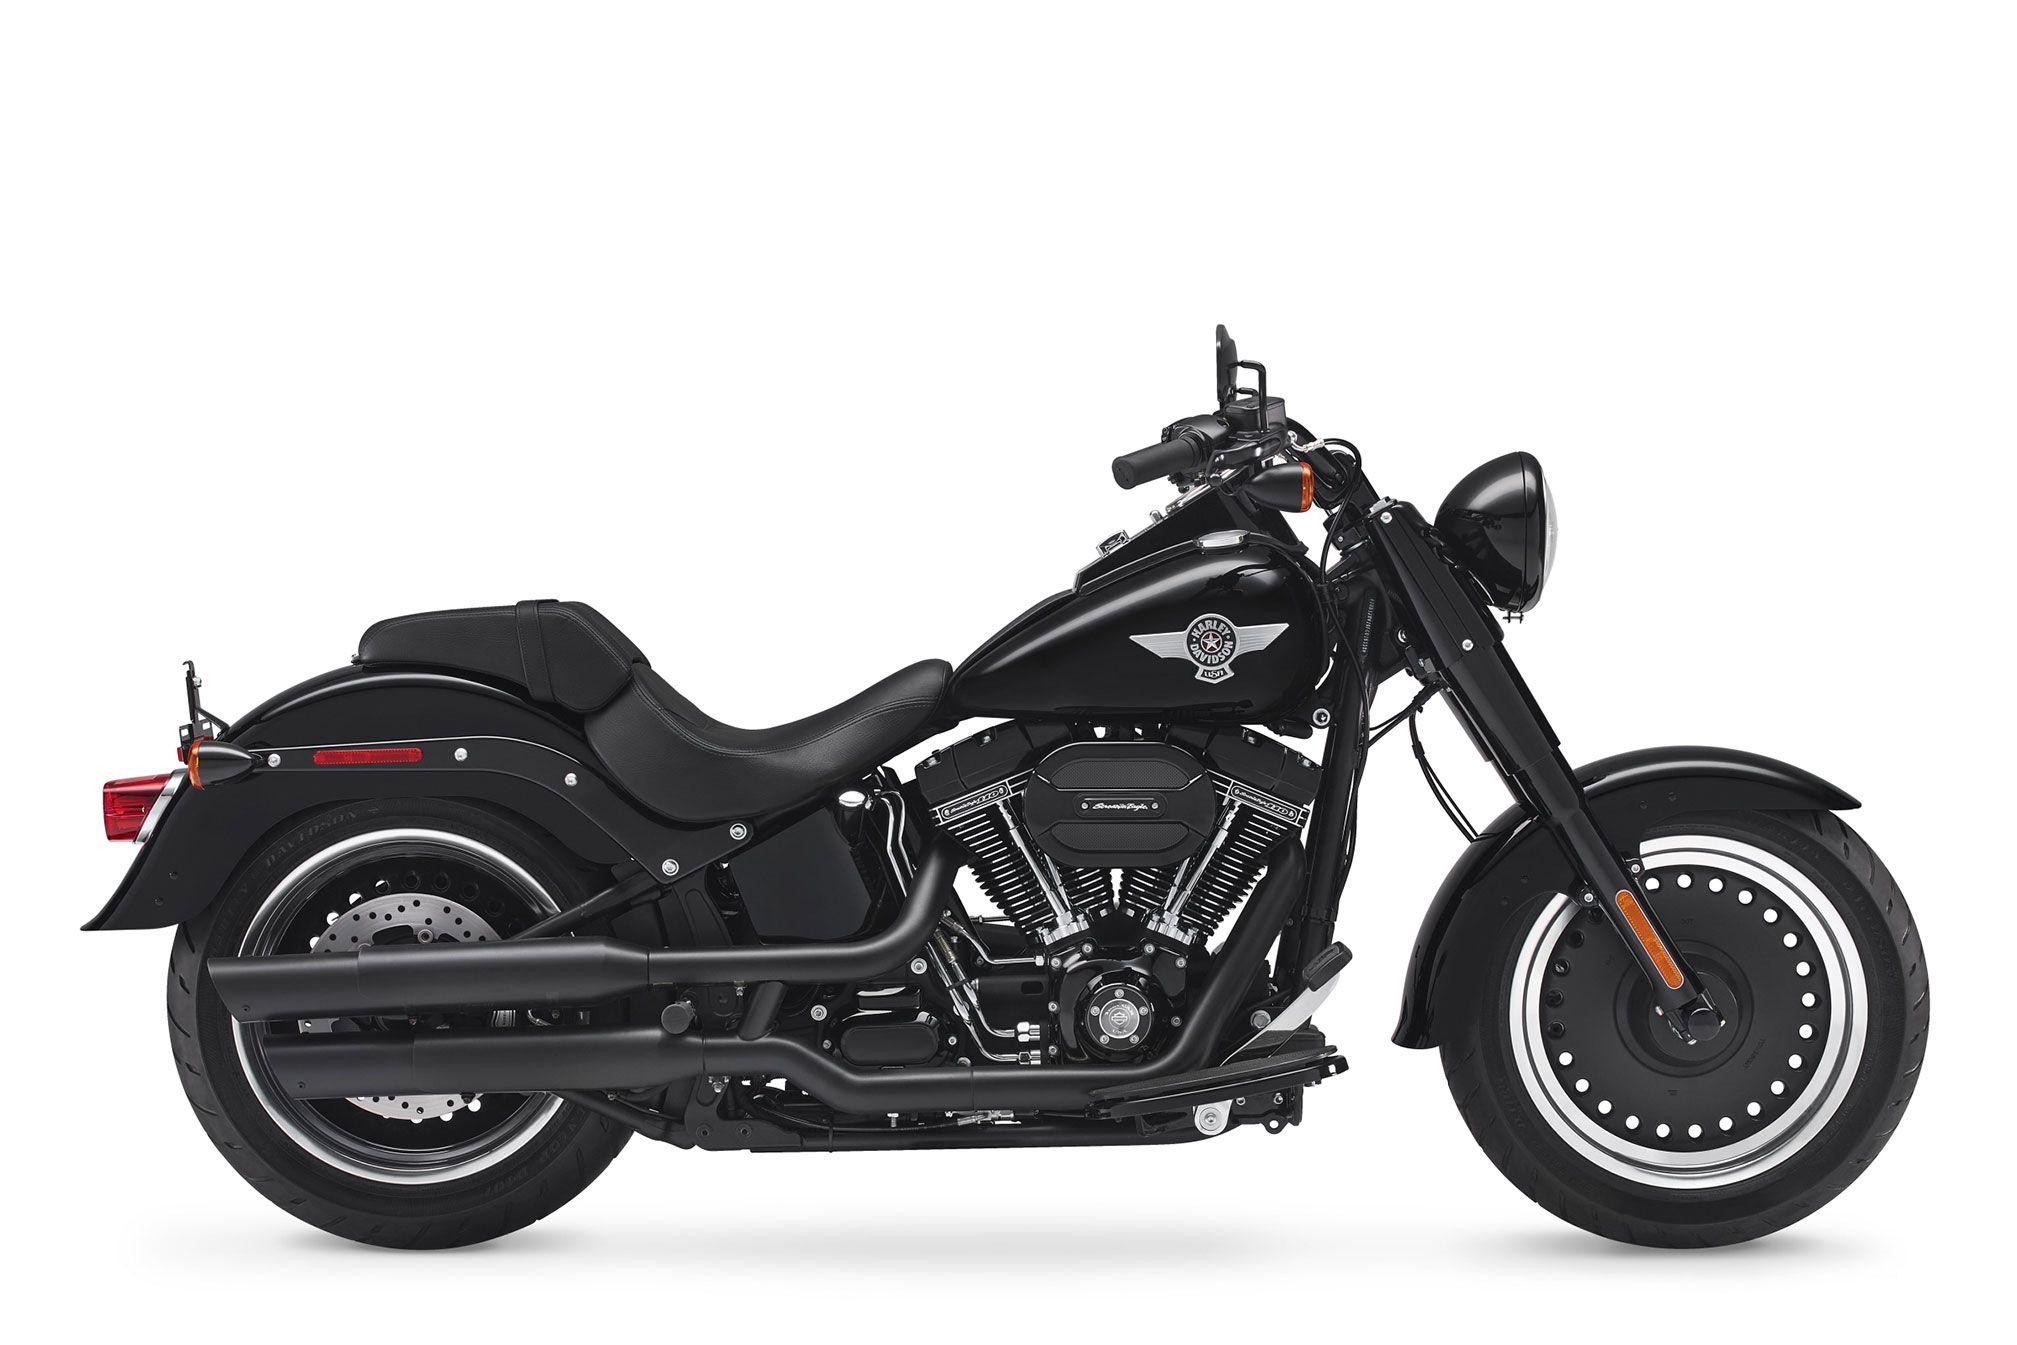 Harley Davidson Fat Boy S Full HD Wallpaper And Background